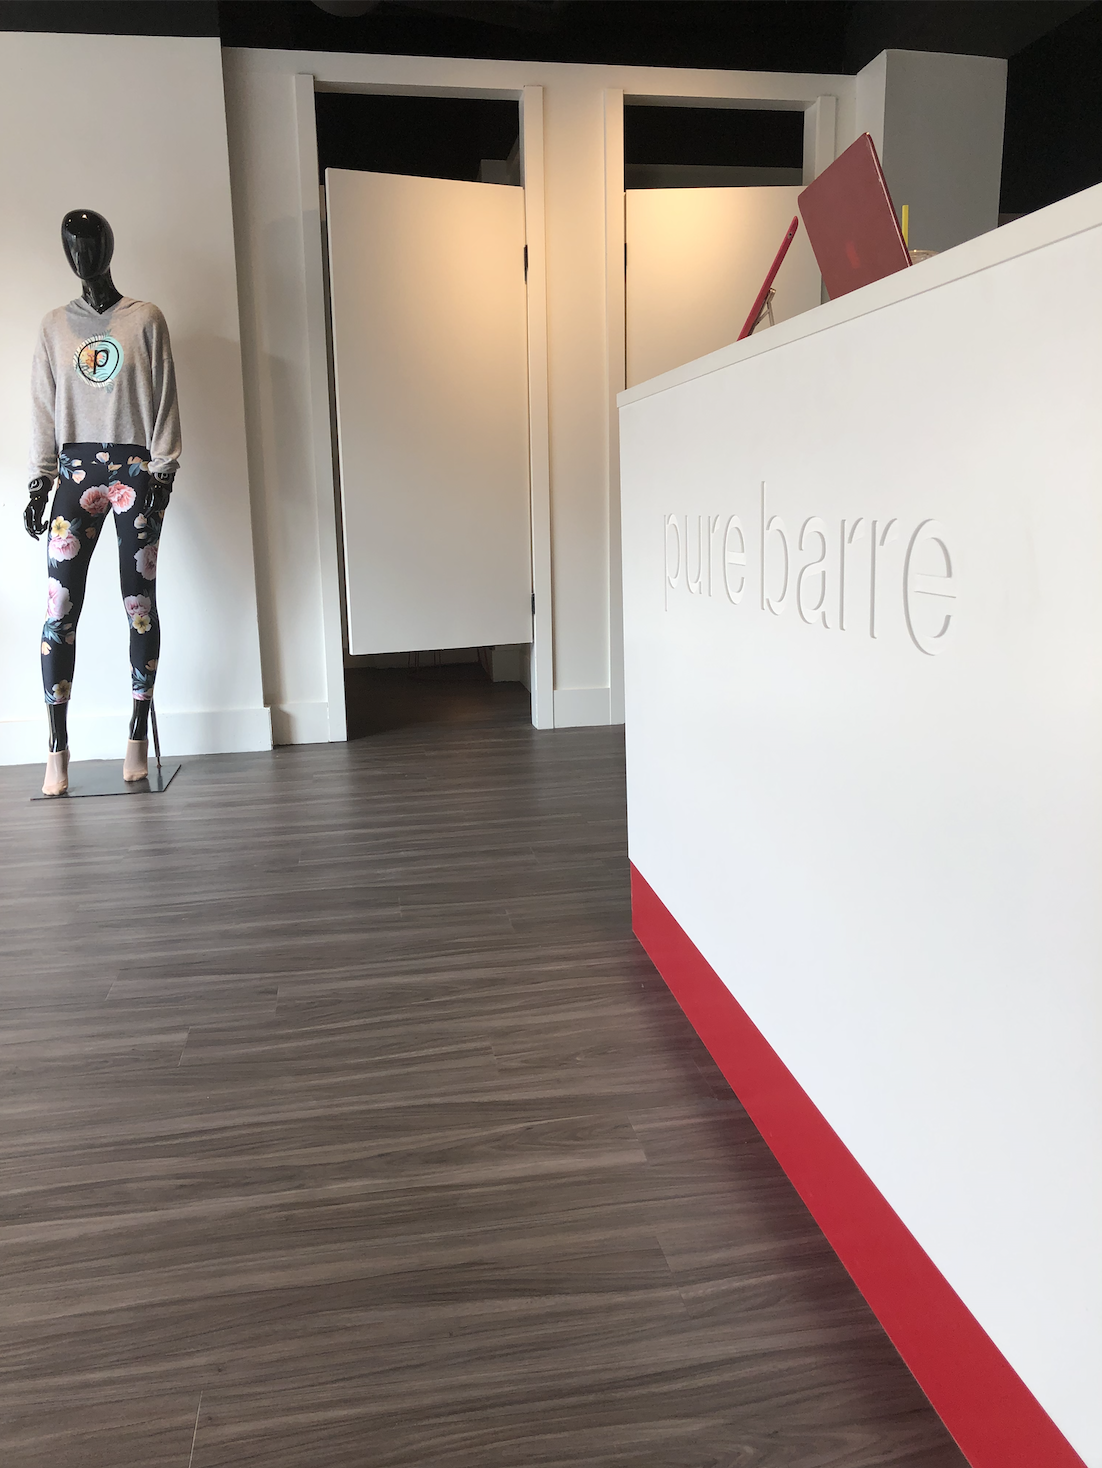 Pure Barre reception area at the Queen Street West location in Toronto.